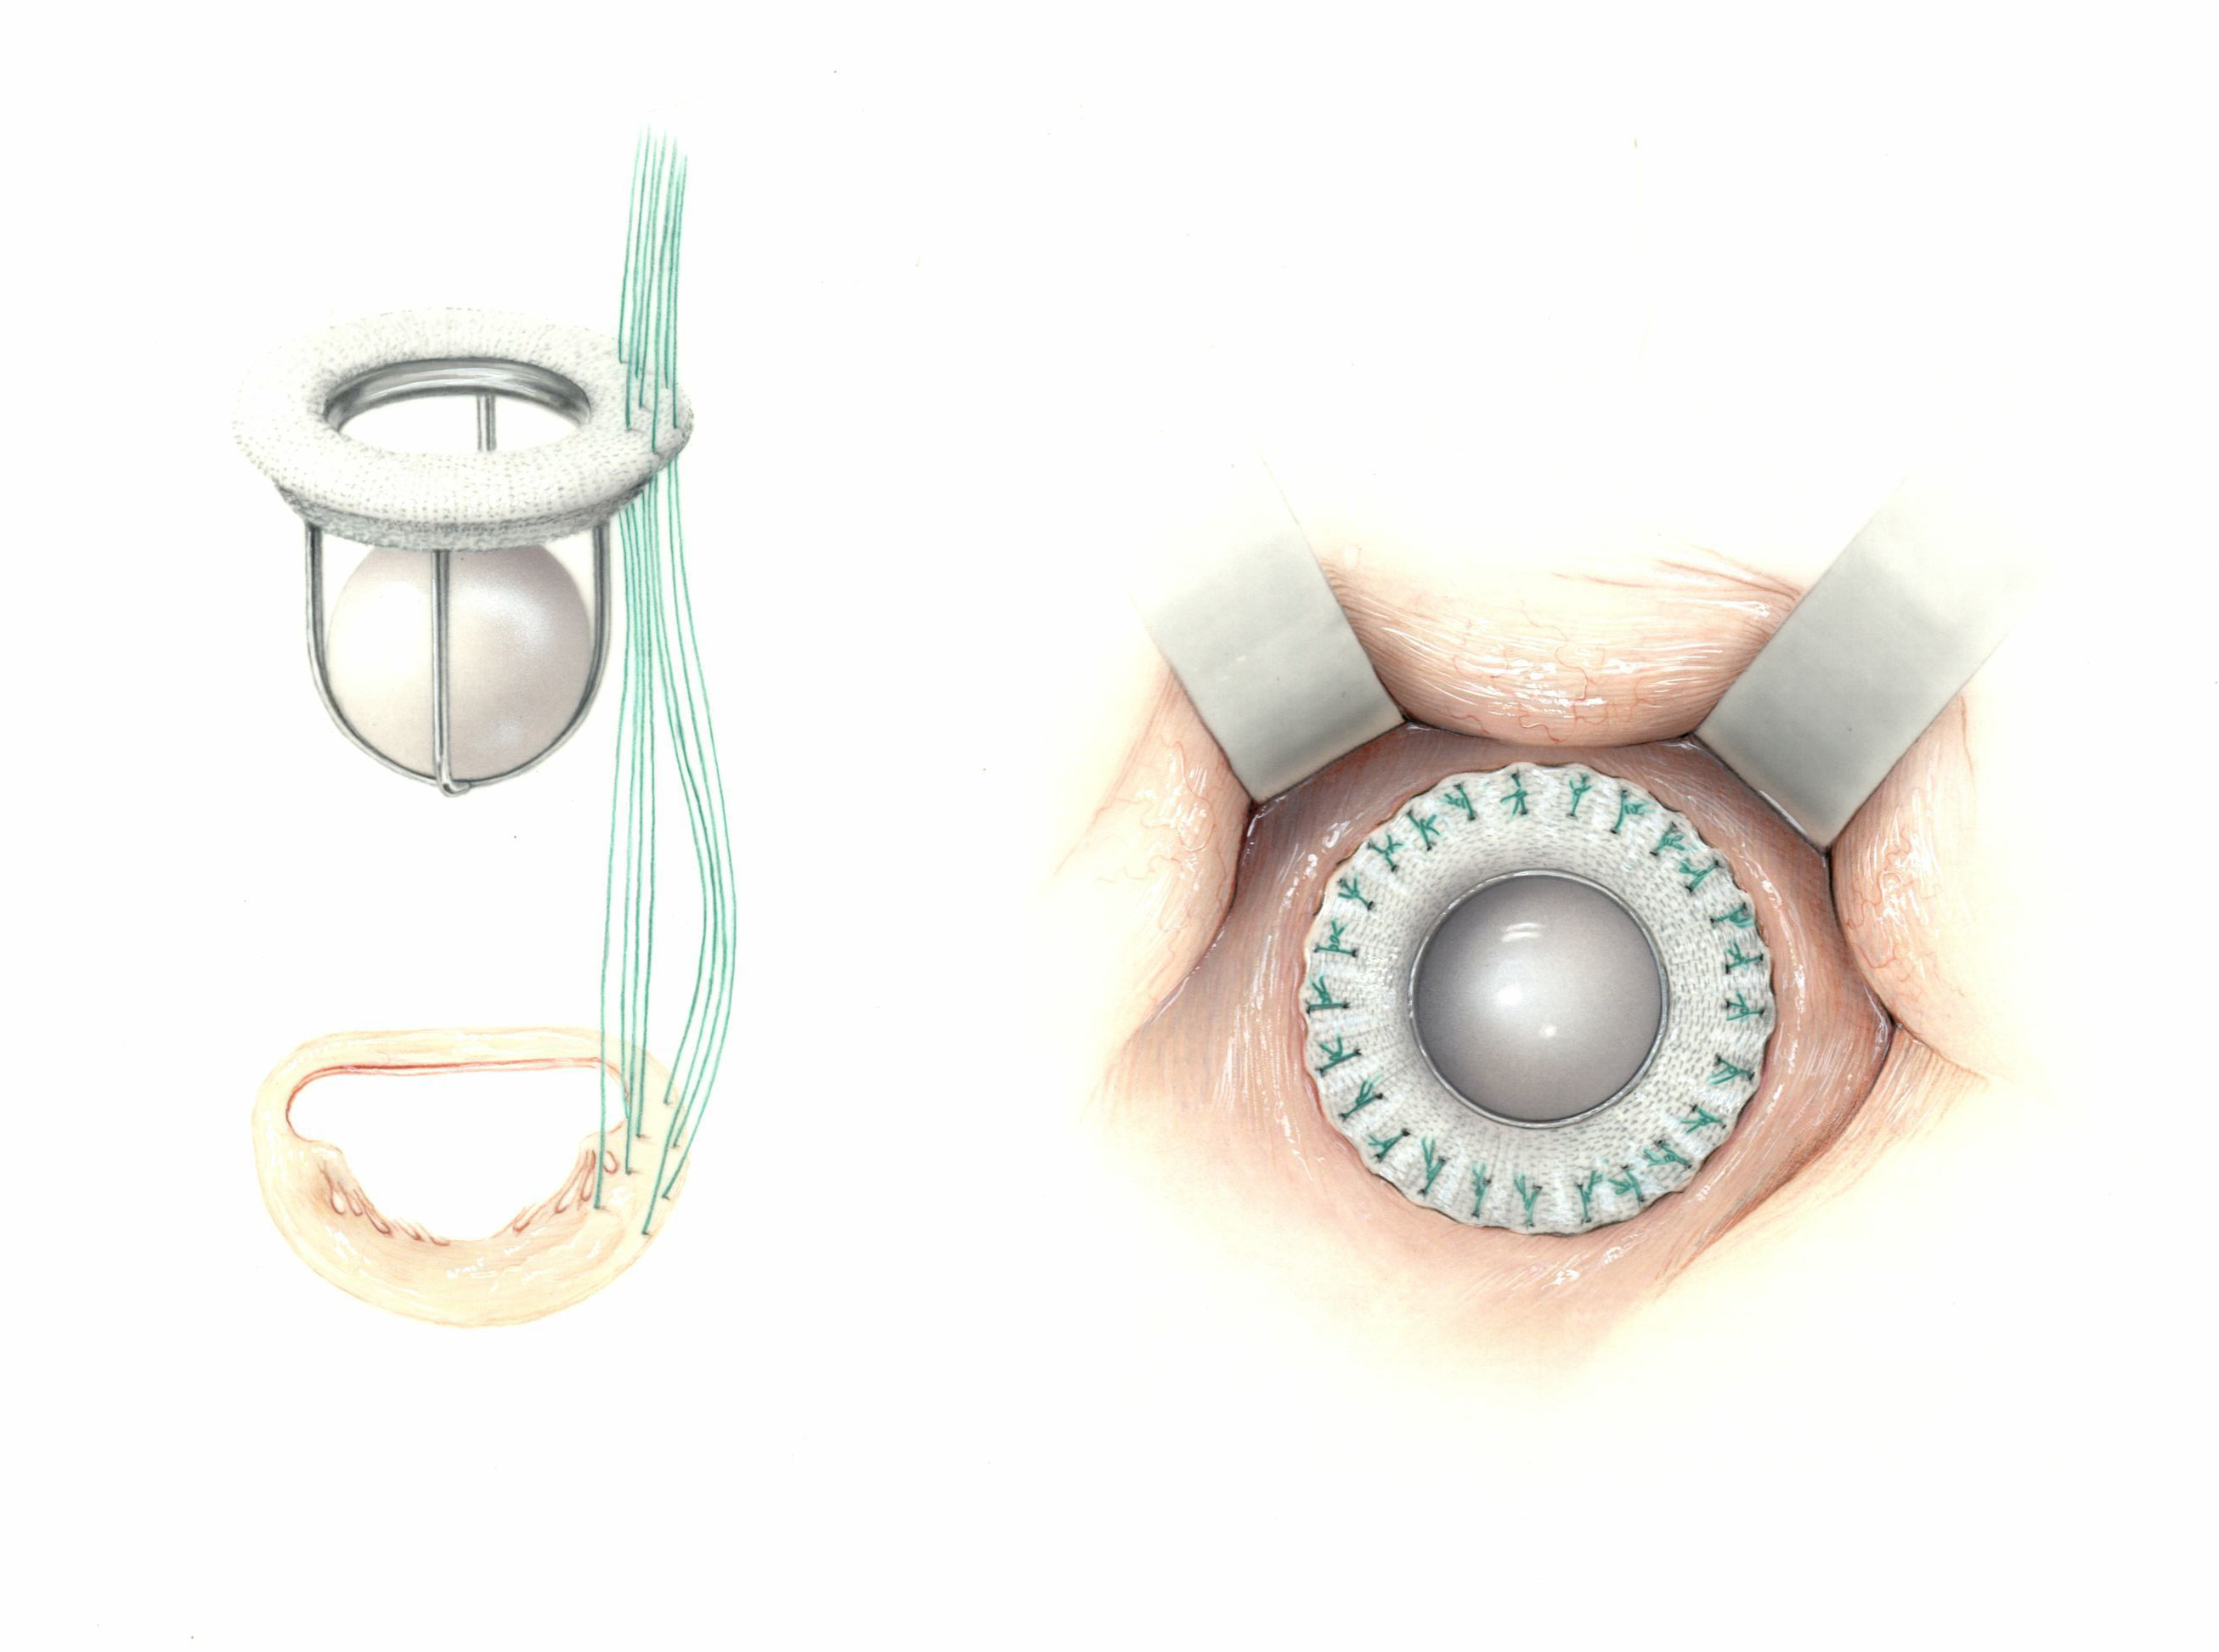 Illustration of Starr-Edwards heart valves from side and top view